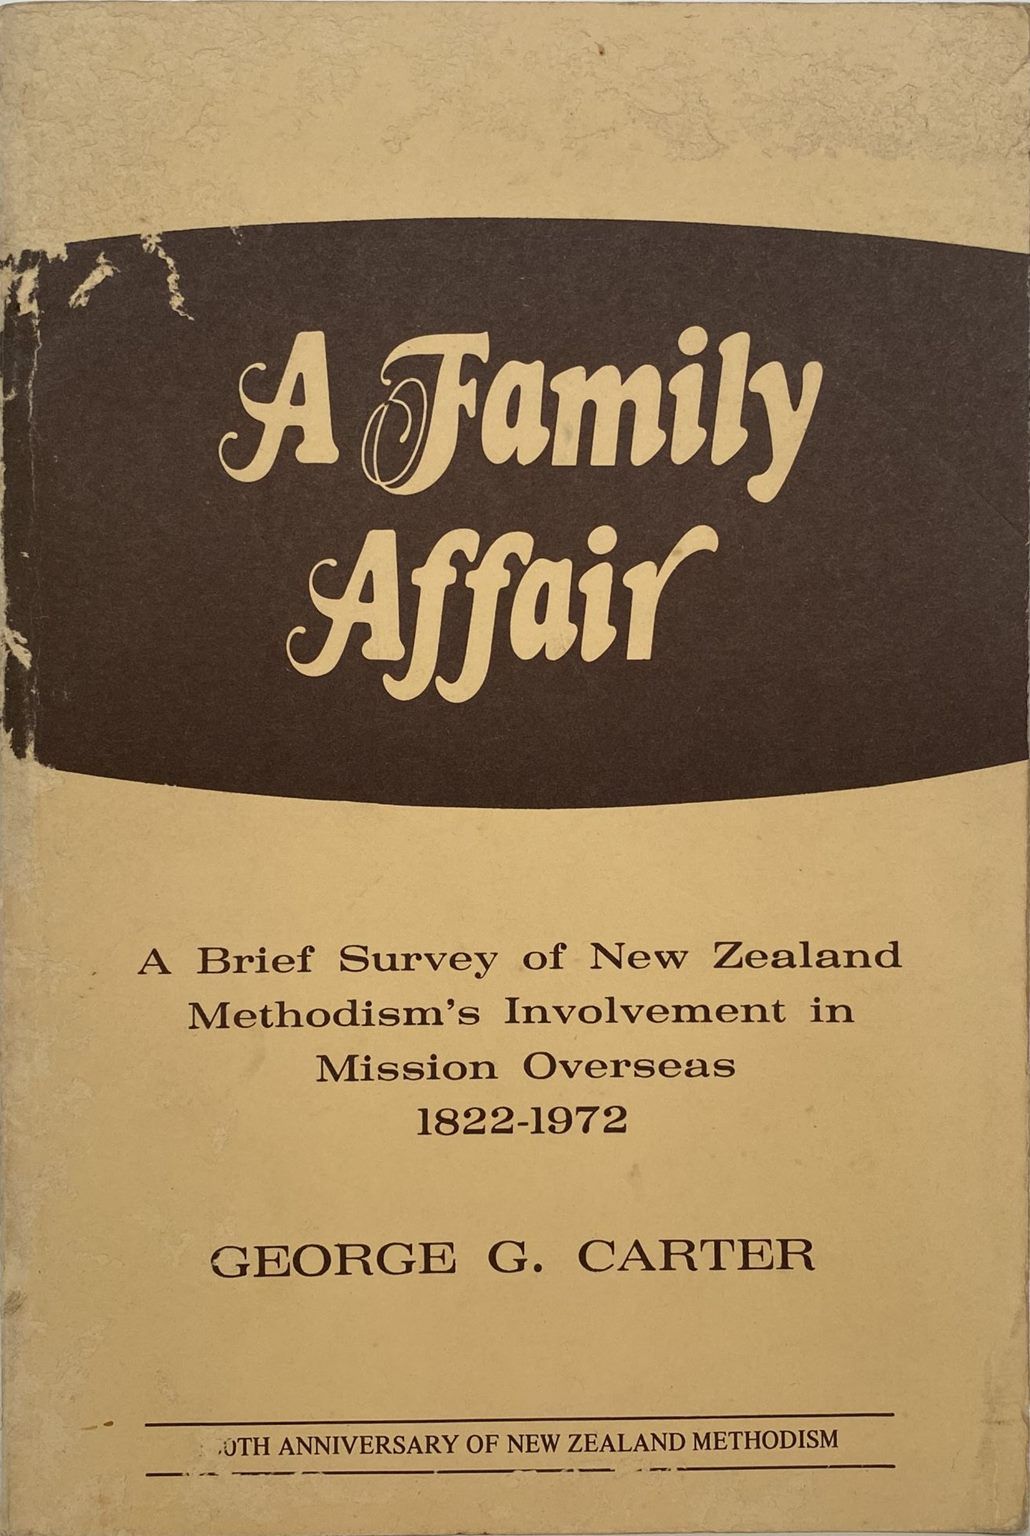 A FAMILY AFFAIR: A Brief Survey of the NZ Methodism's Mission Overseas 1822-1972